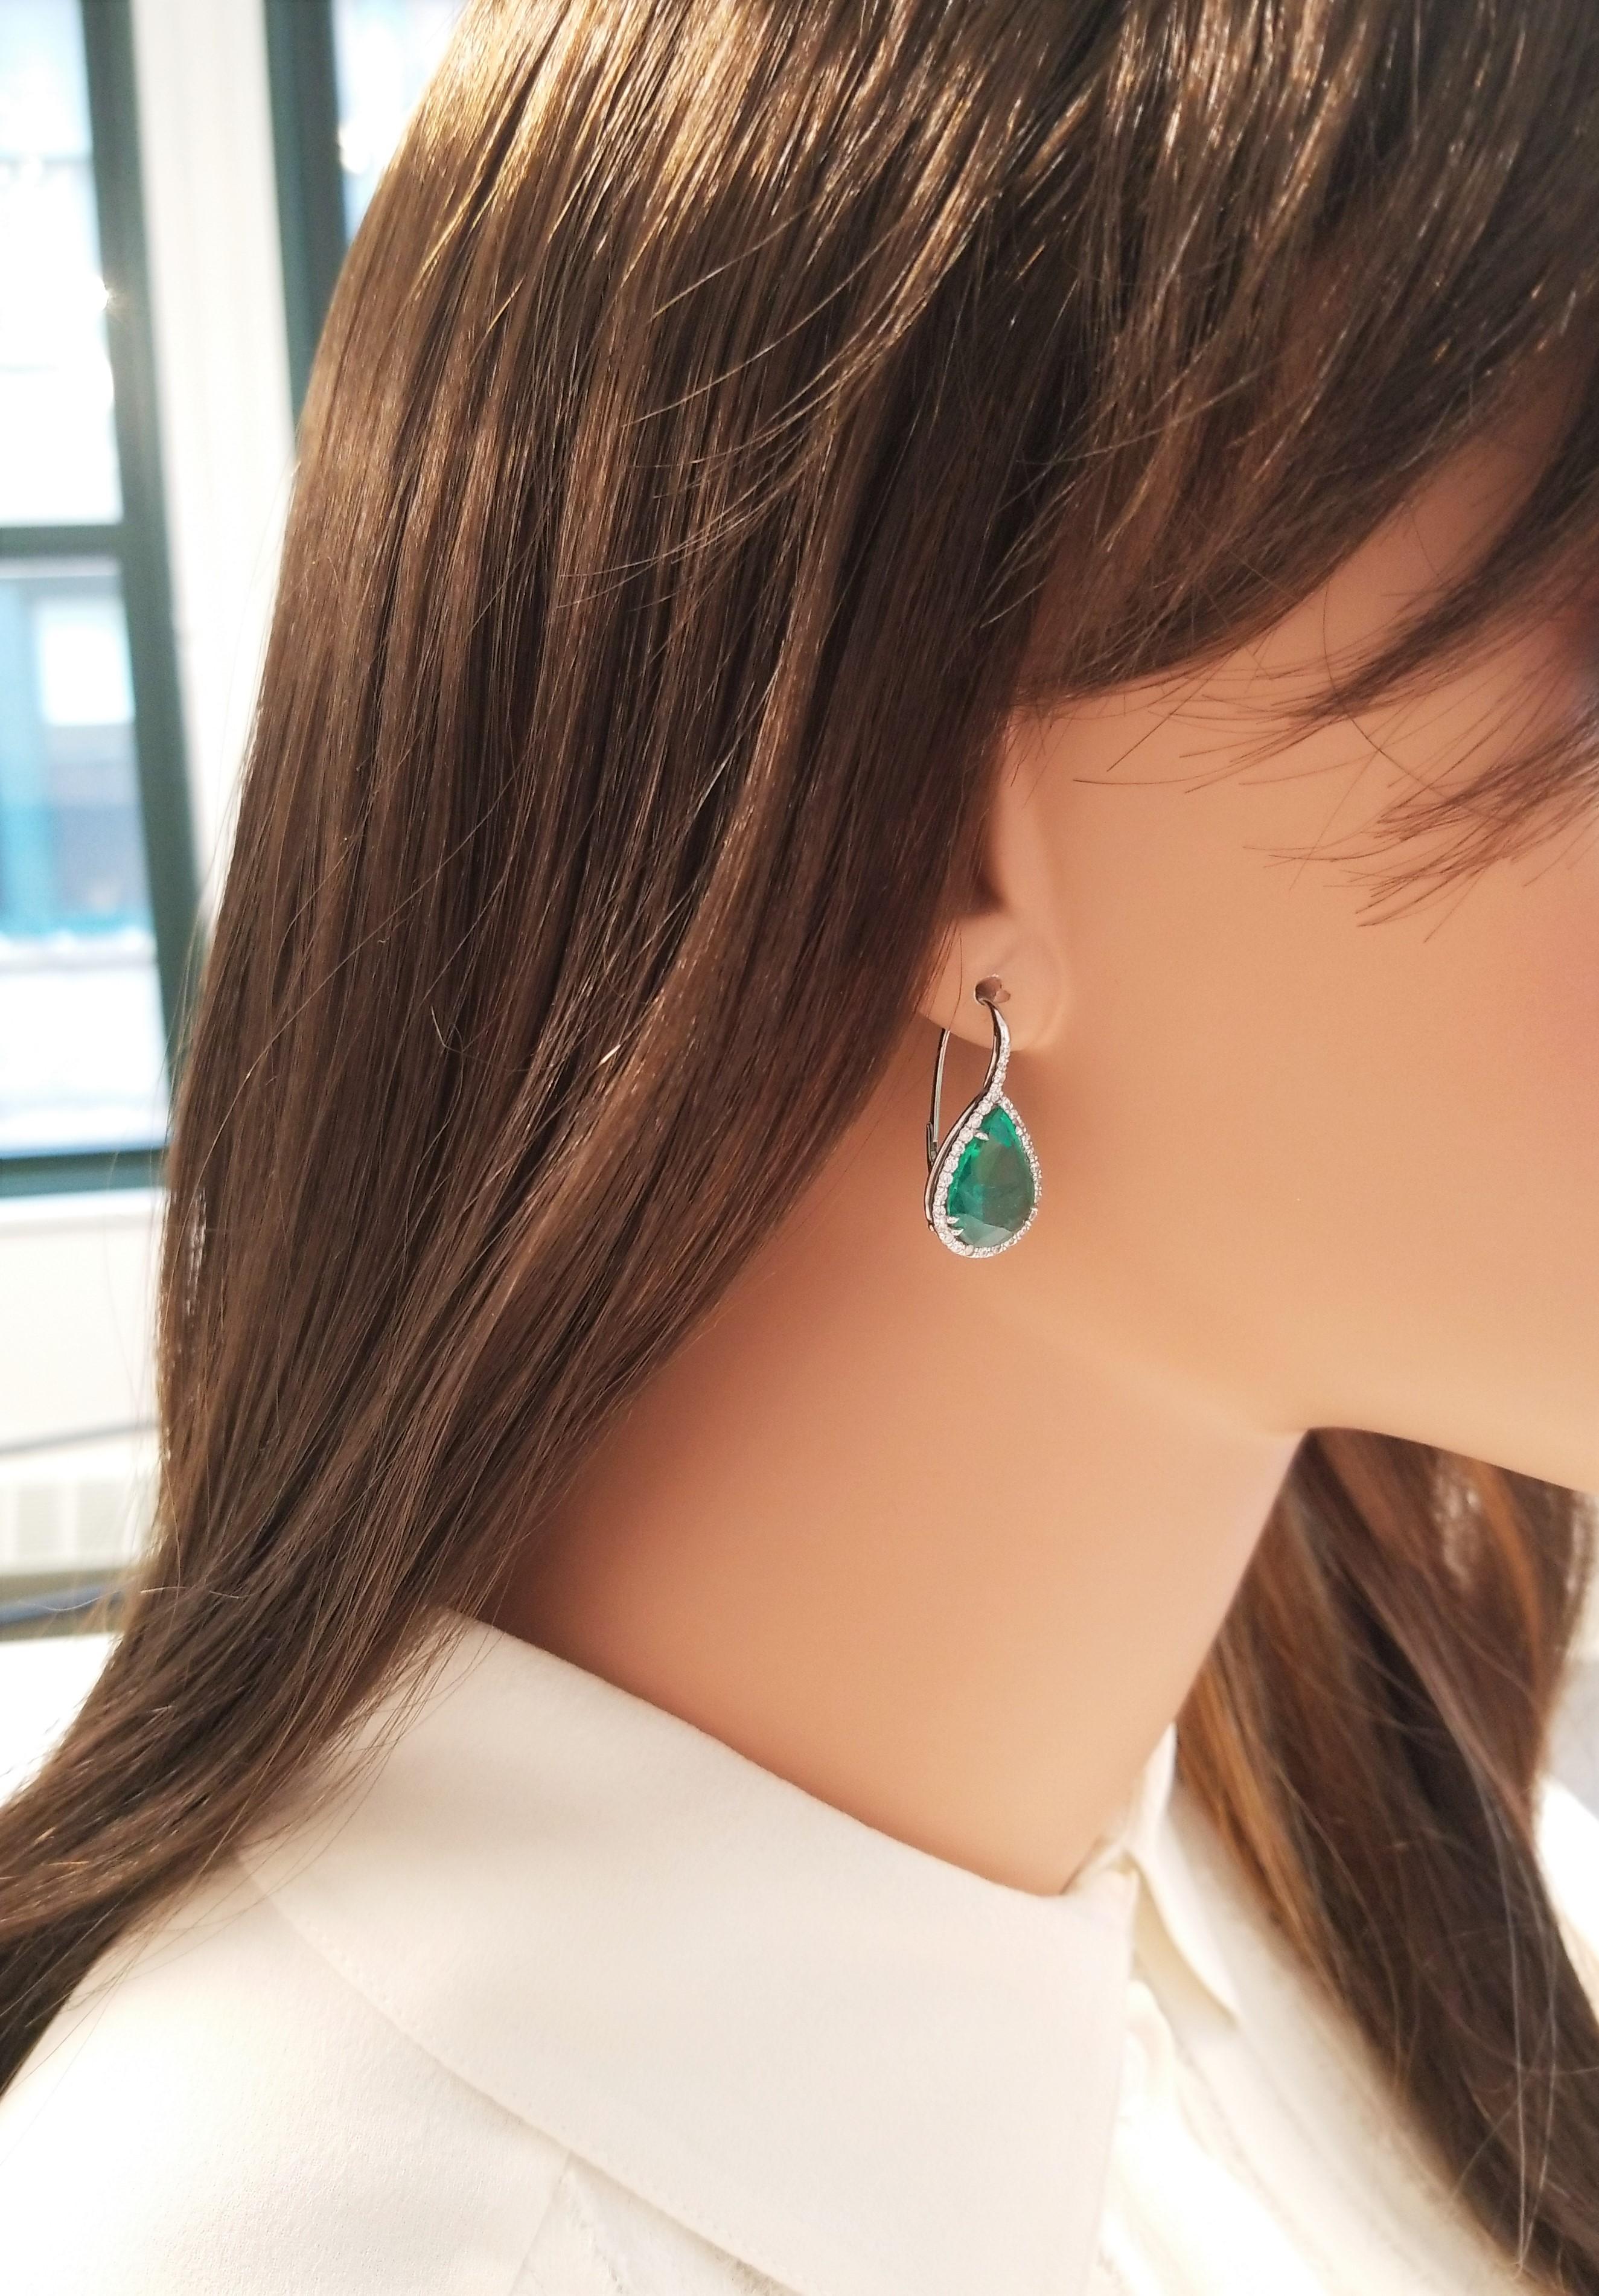 These forest-green emerald and diamond drop earrings will certainly get notice. The stunning emeralds are from Zambia. The pear shaped emeralds weigh 11.18 carat total weight and are encased in a brilliant halo of 0.76 carats of diamonds and 18k